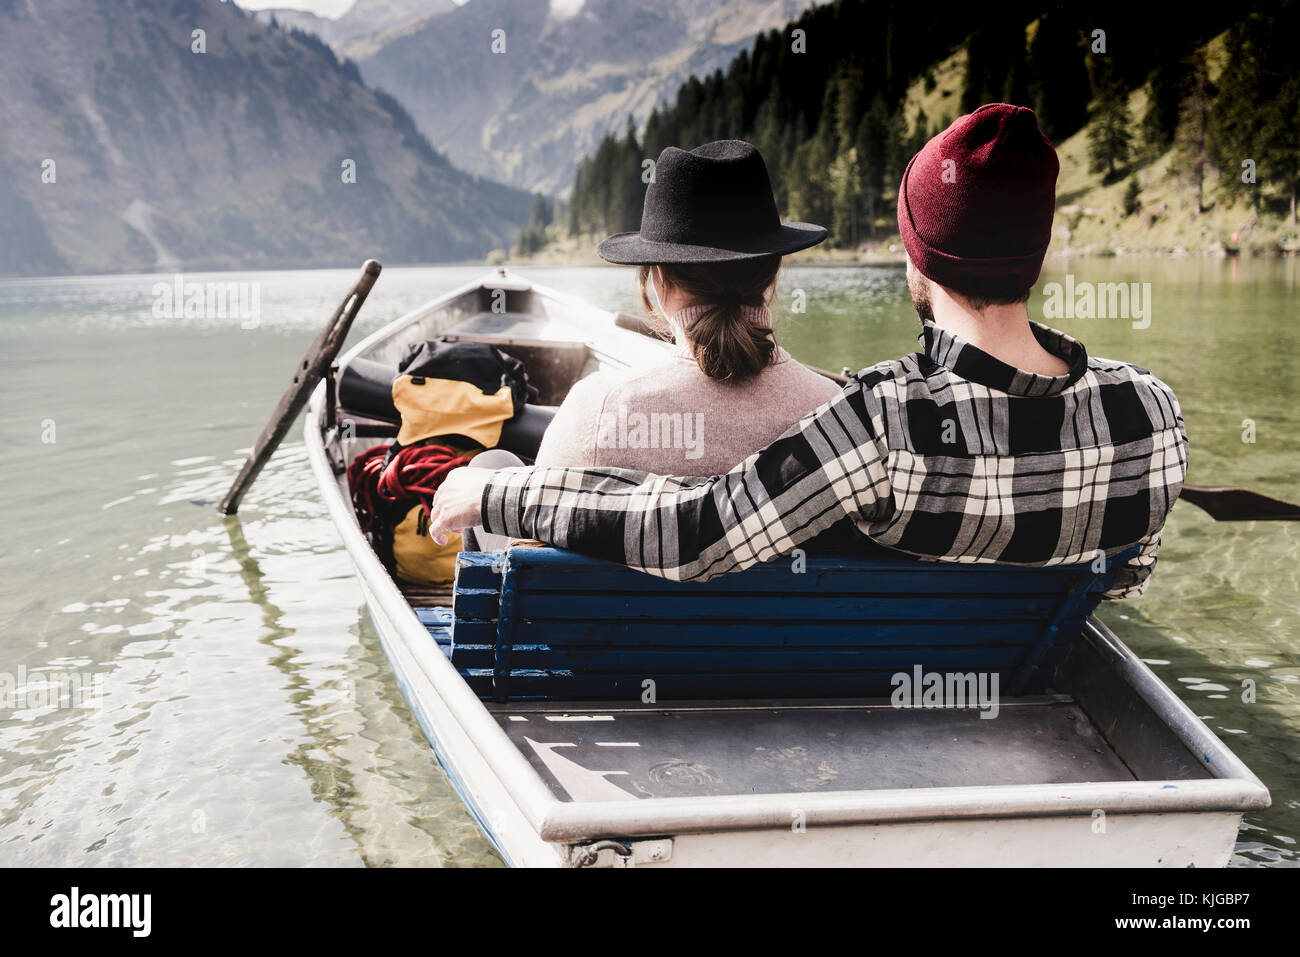 Austria, Tyrol, Alps, relaxed couple in rowing boat on mountain lake Stock Photo